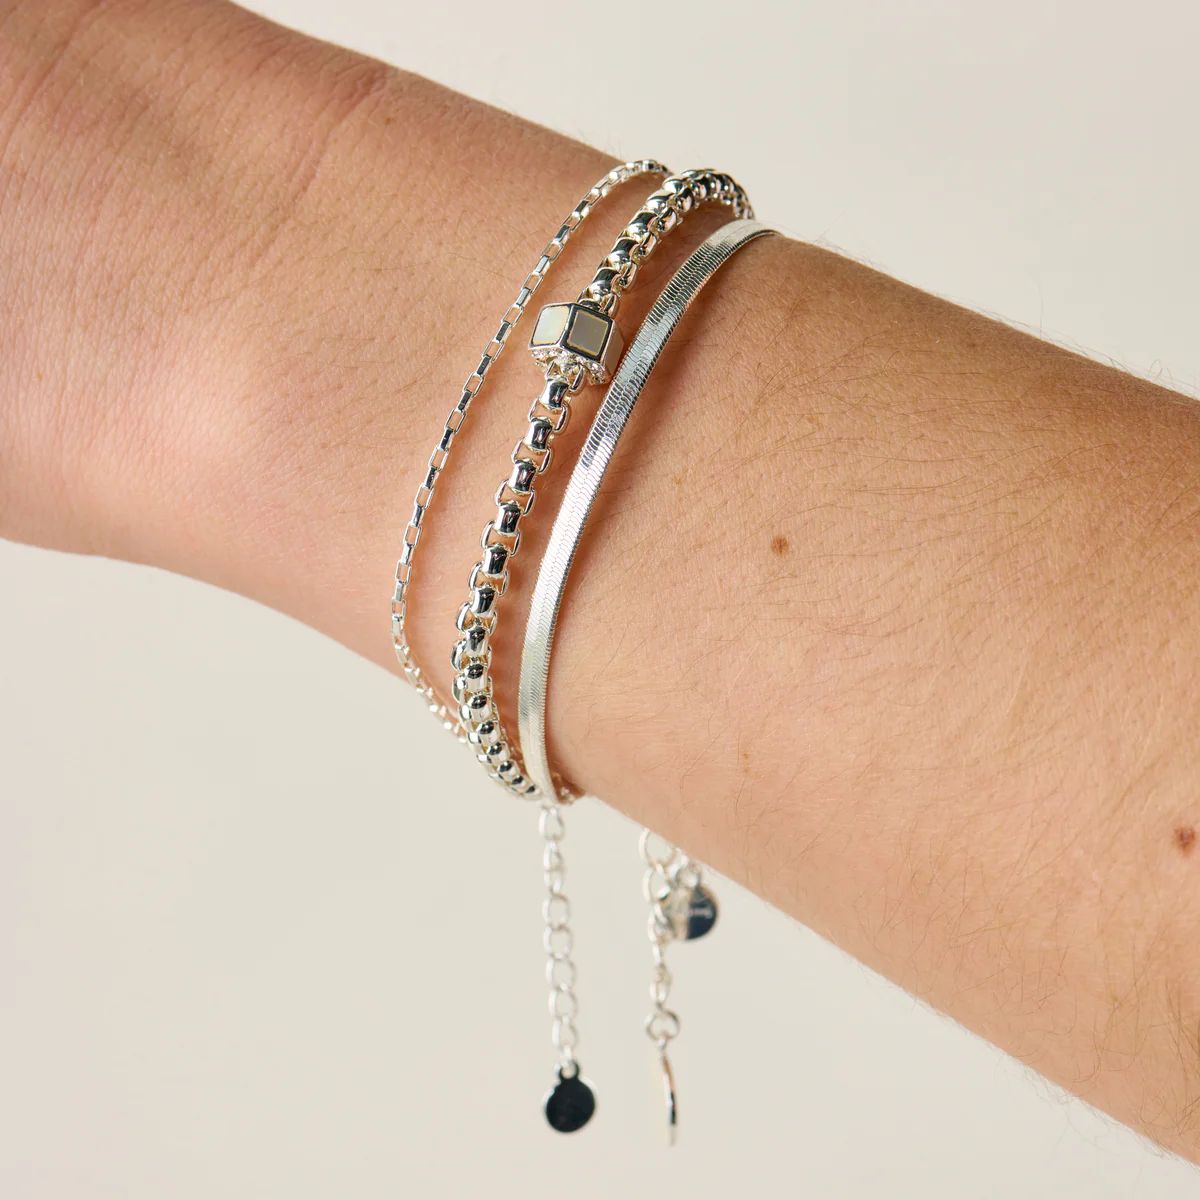 Mother Of Pearl Venetian Chain Bracelet | ALEX AND ANI | Alex and Ani